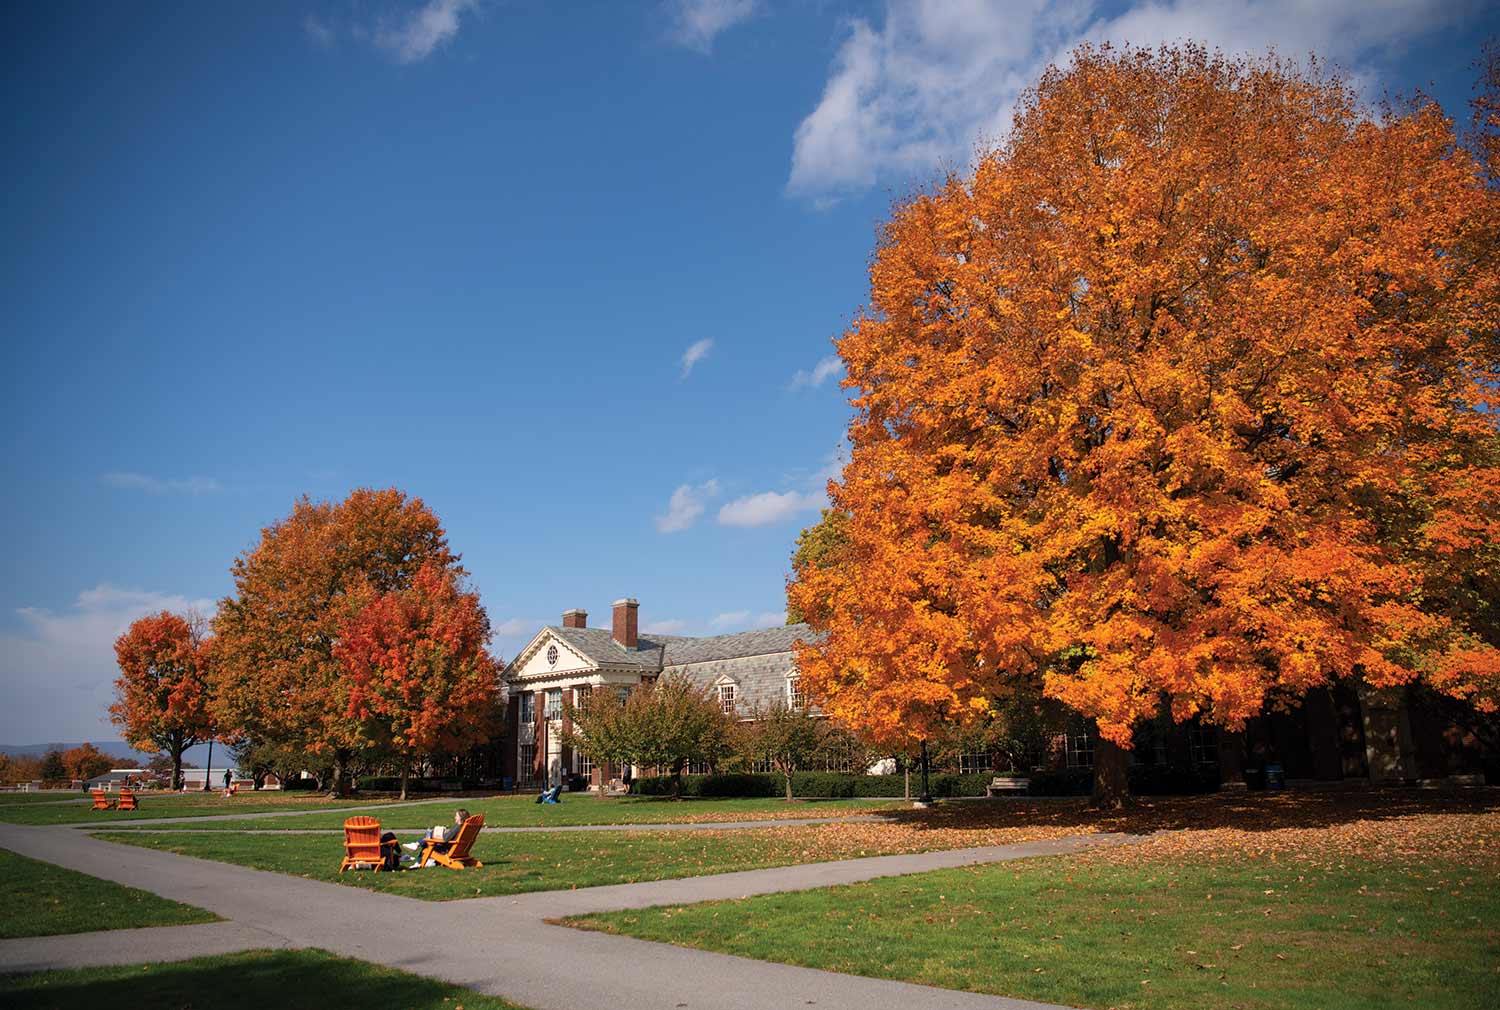 The bright orange trees of Bucknell growing in fresh, green grasses contrasted by a sky of blue.